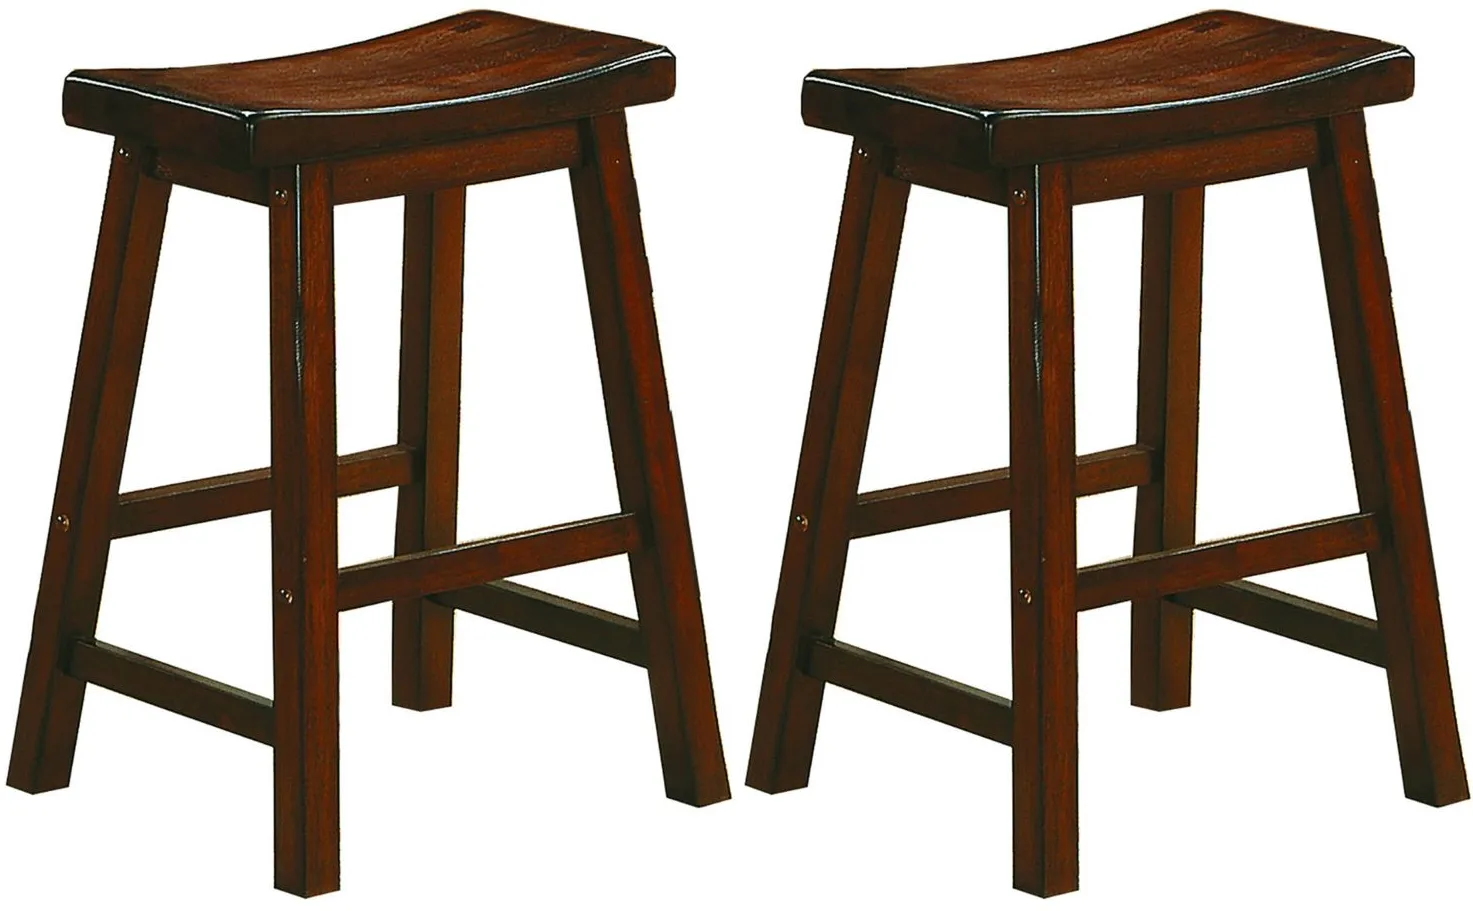 Goya Counter-Height Stool - Set of 2 in Warm Cherry by Homelegance